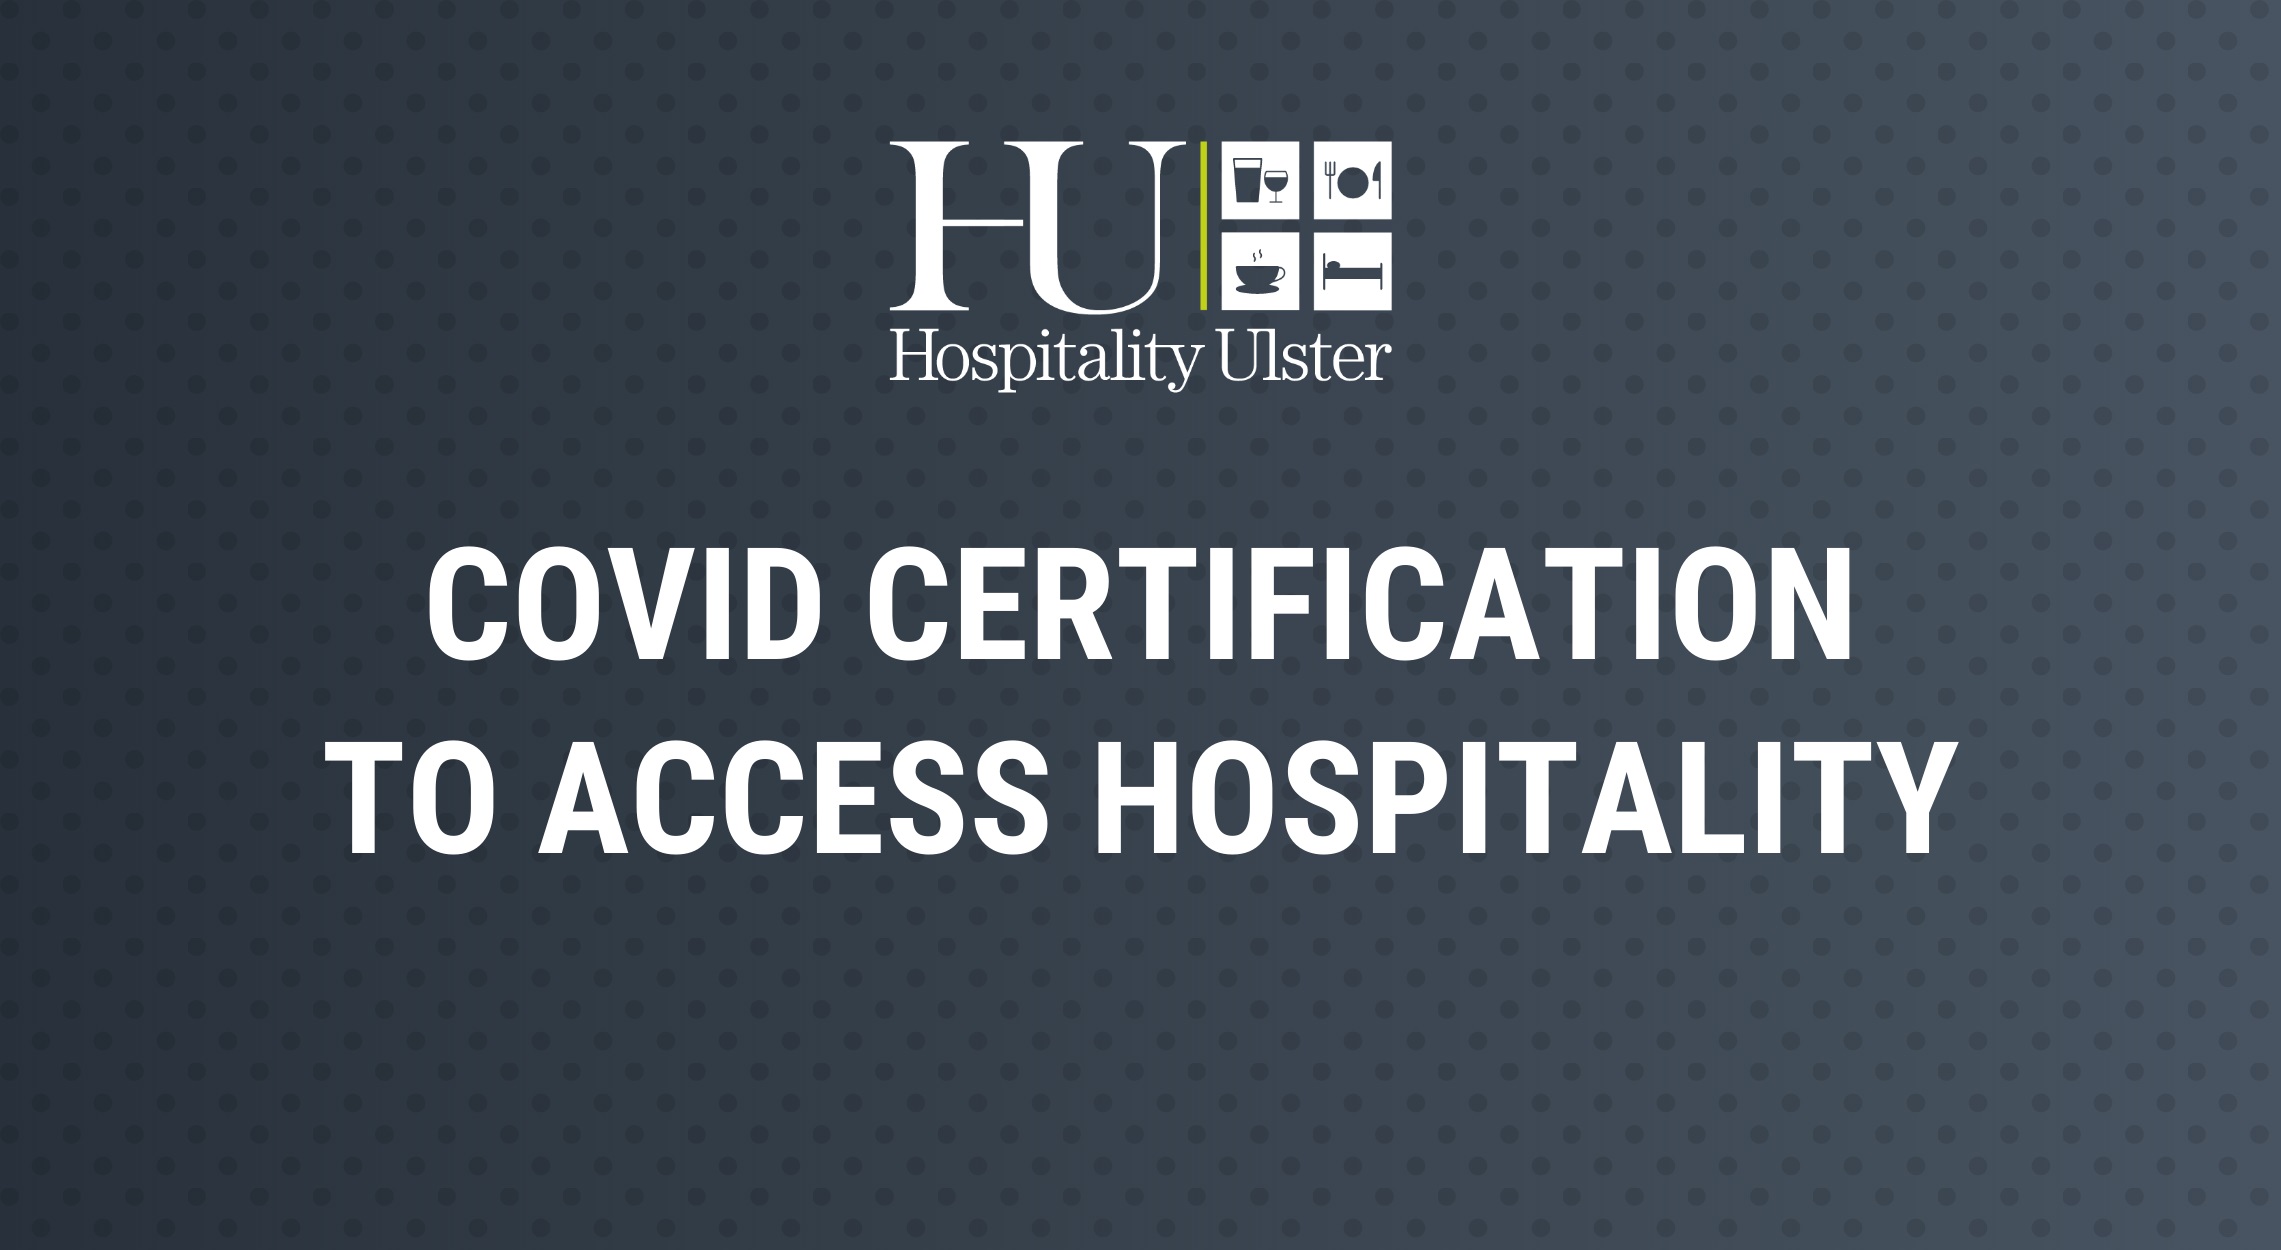 COVID CERTIFICATION TO ACCESS HOSPITALITY